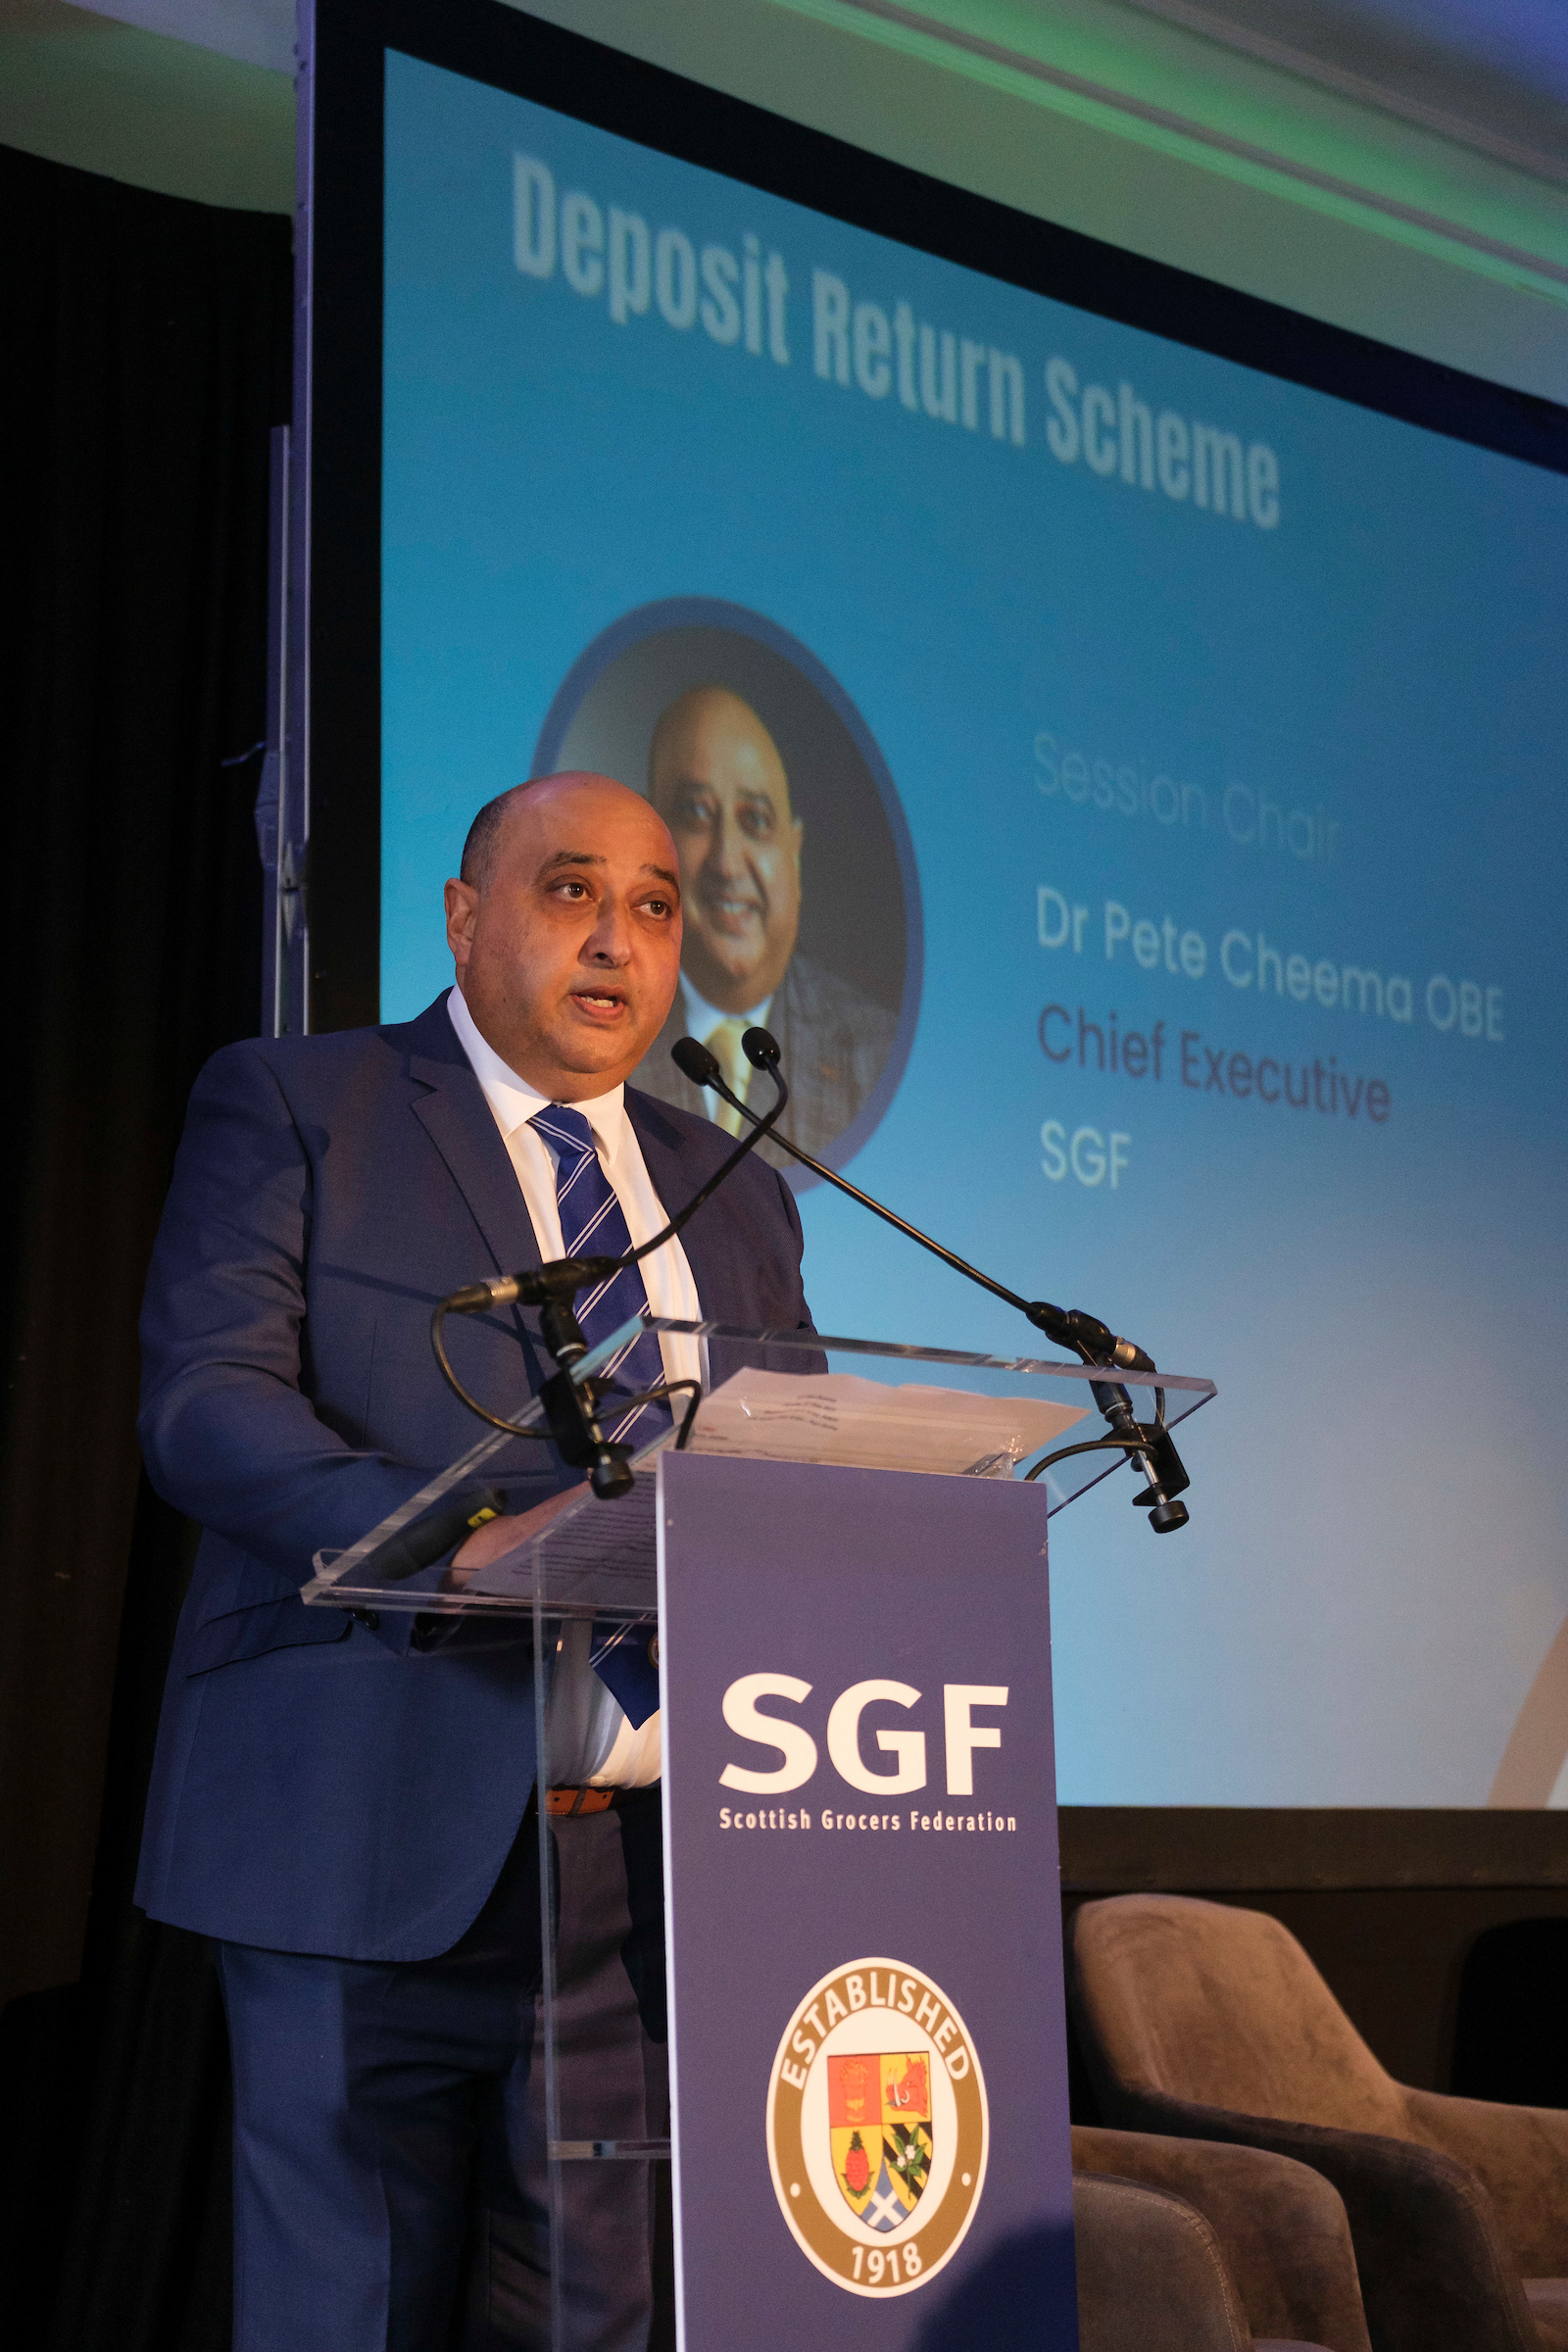 SGF calls for collaborative approach, warns against restrictions for Scotland’s environmental targets